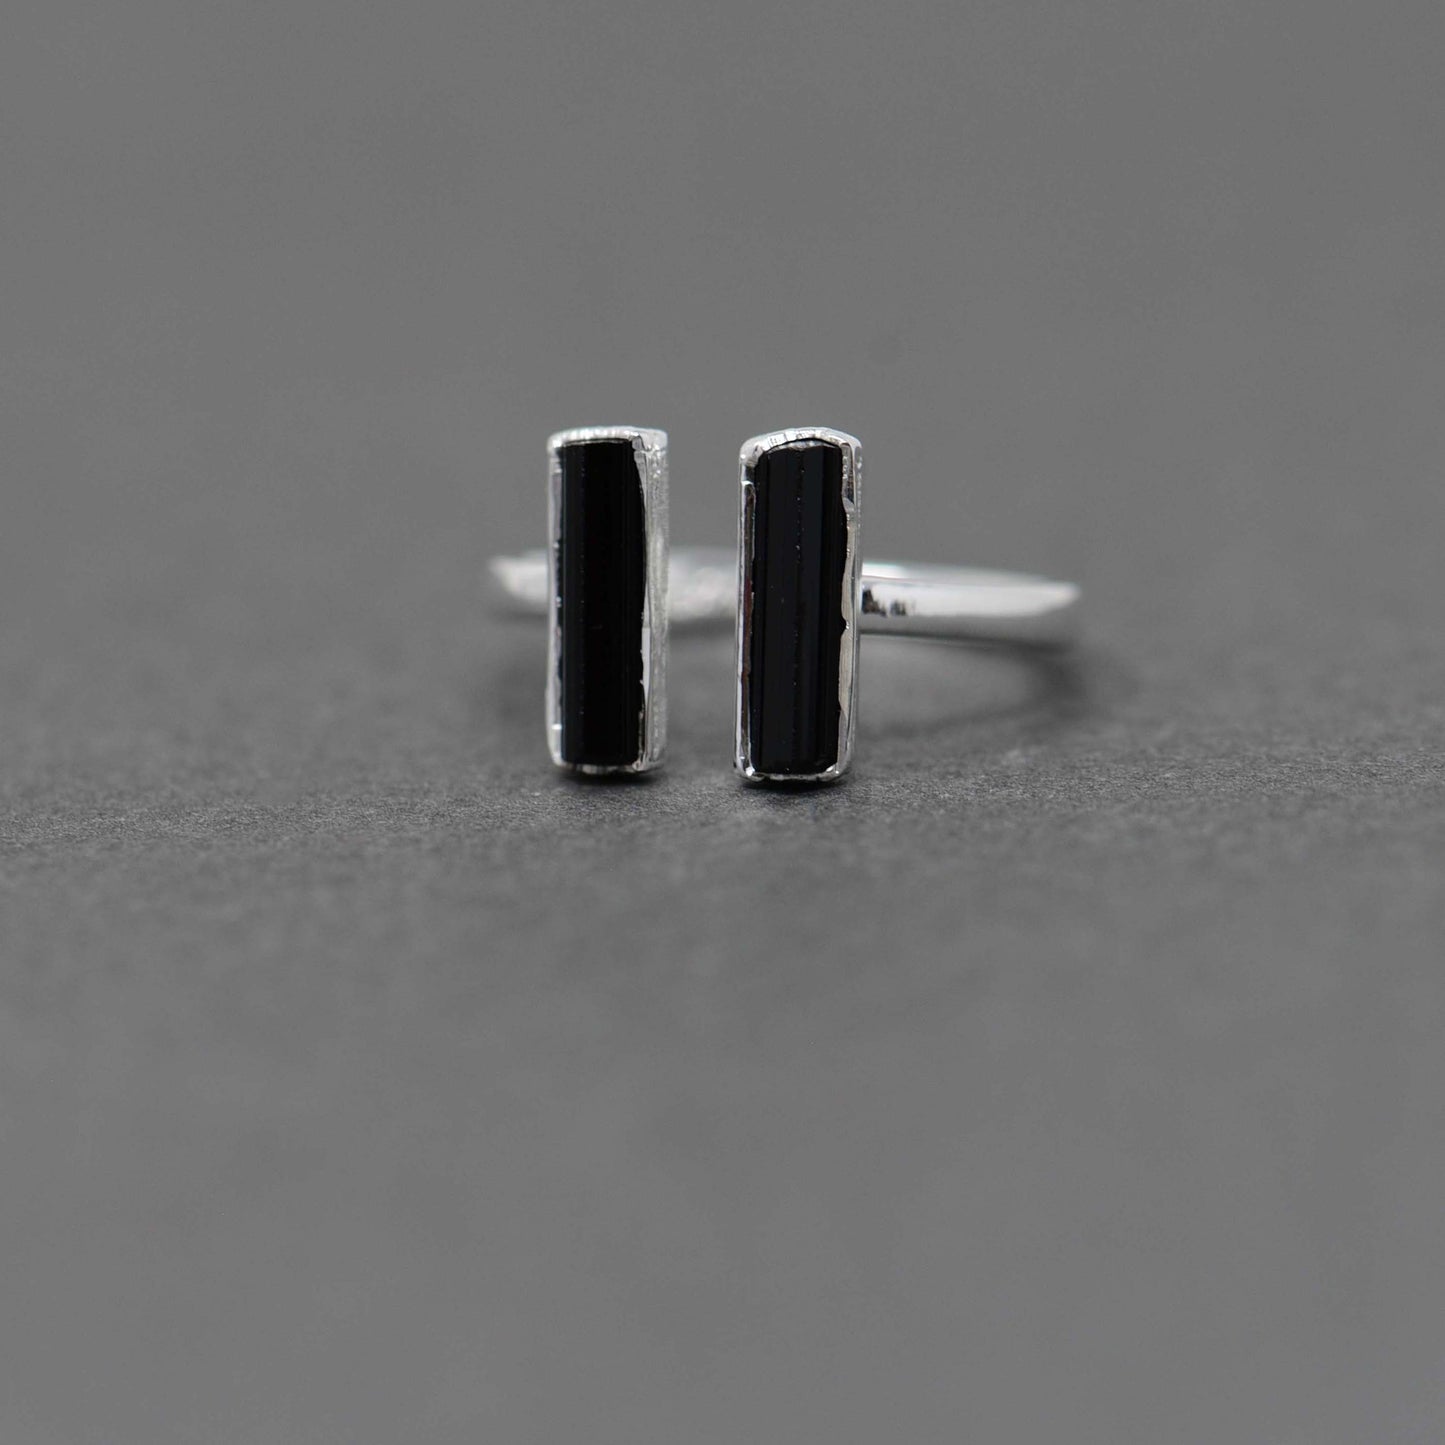 Silver ring with Rough Black Tourmaline